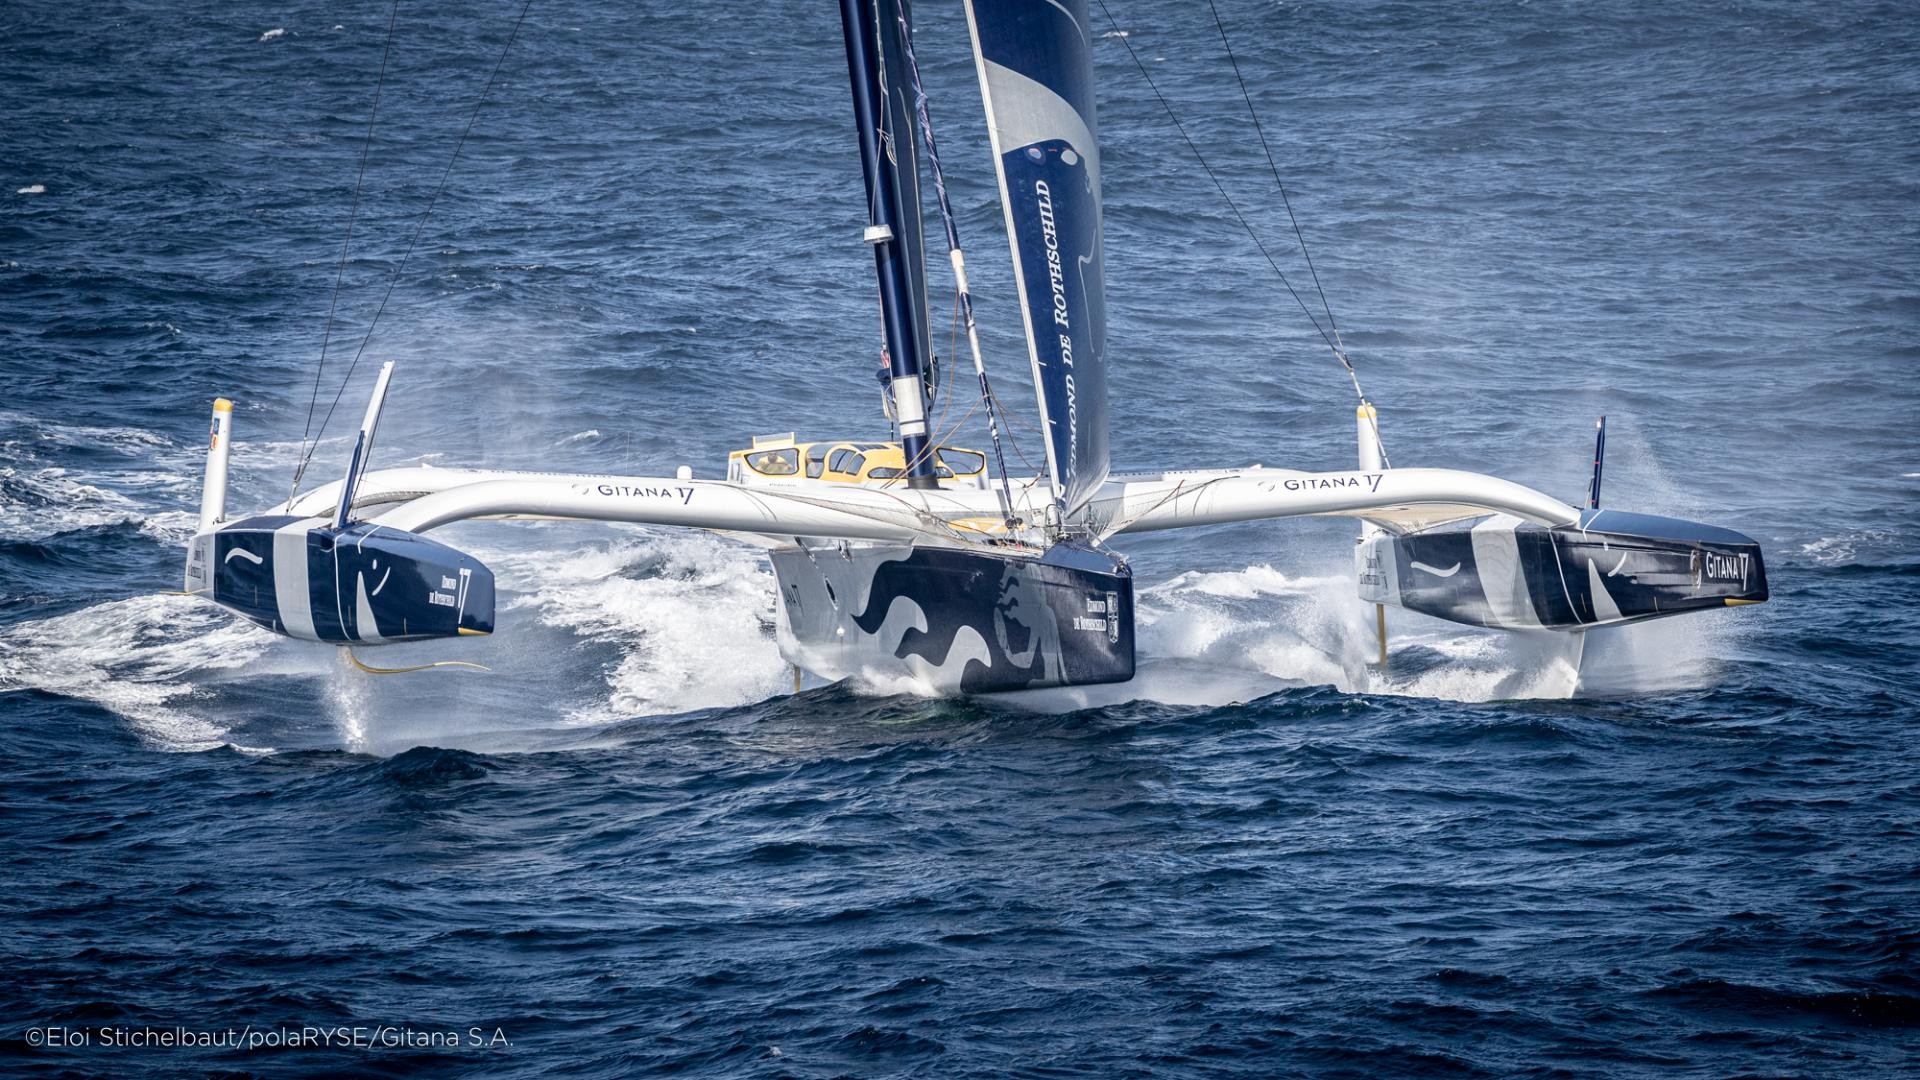 Jules Verne Trophy: settling into life in the fast track